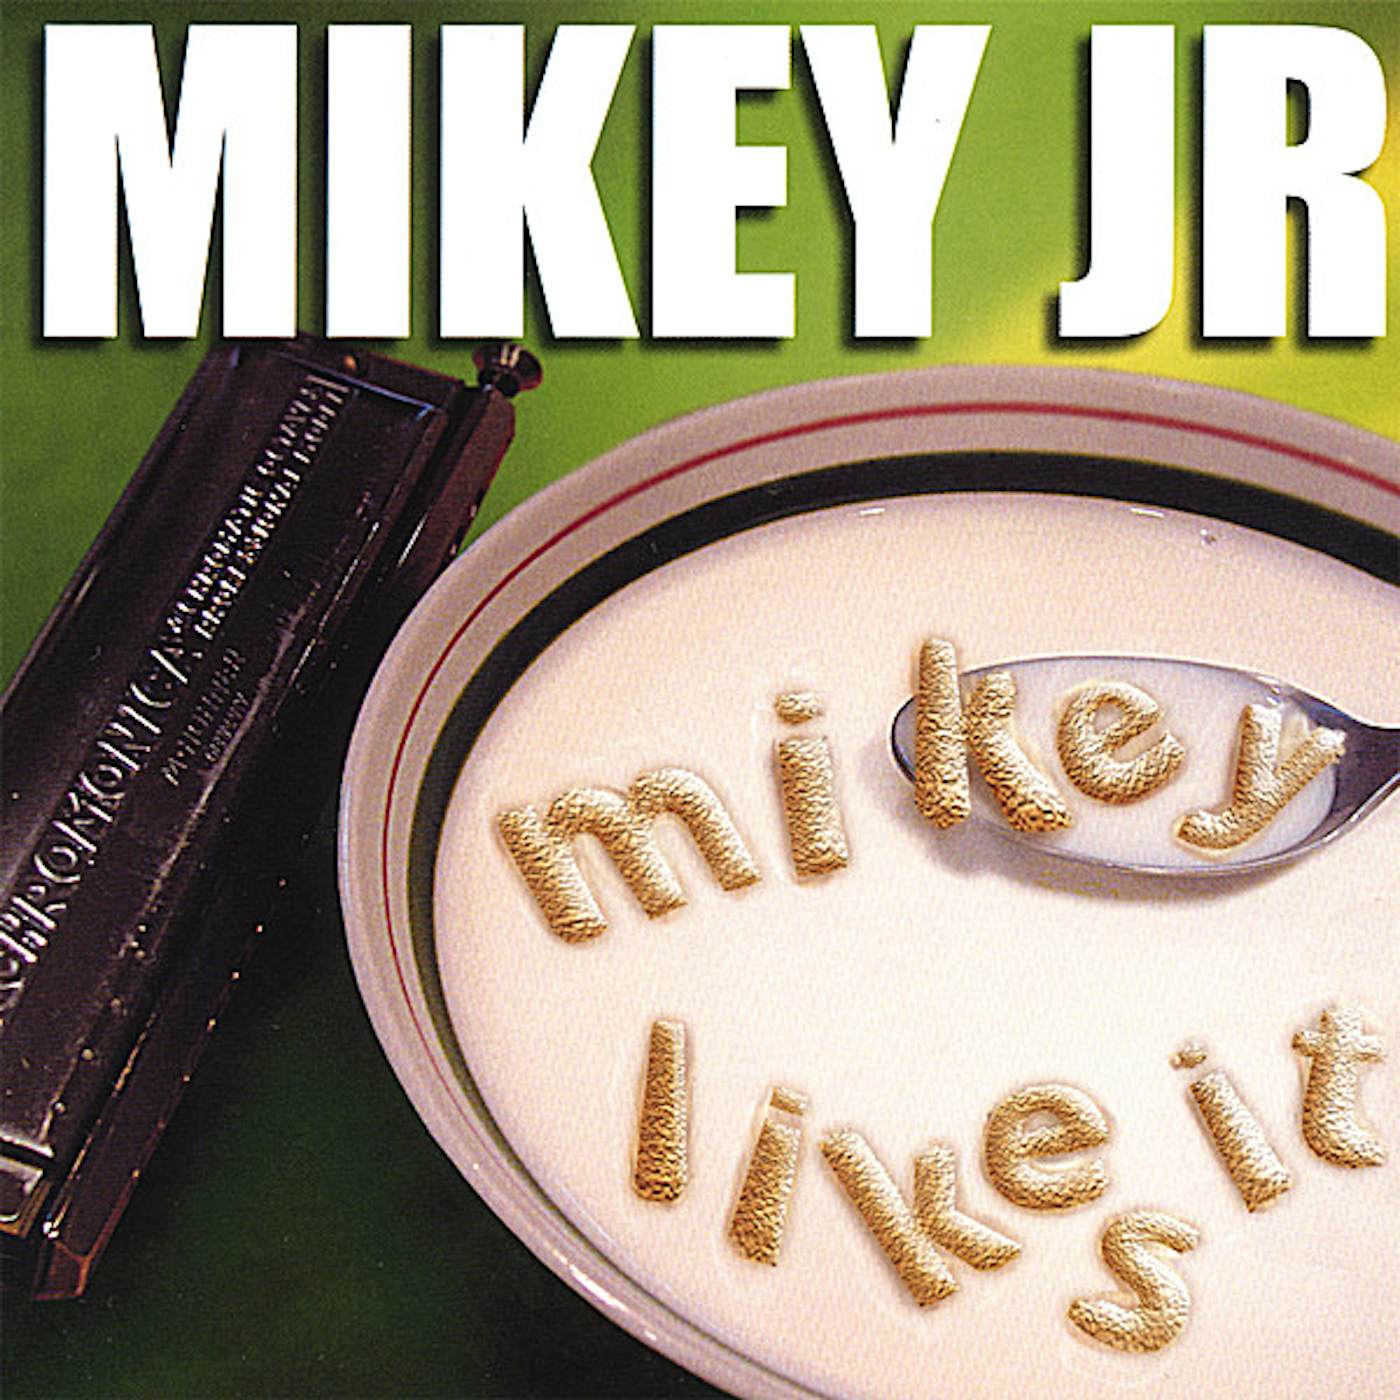 Mikey Junior MIKEY LIKES IT CD